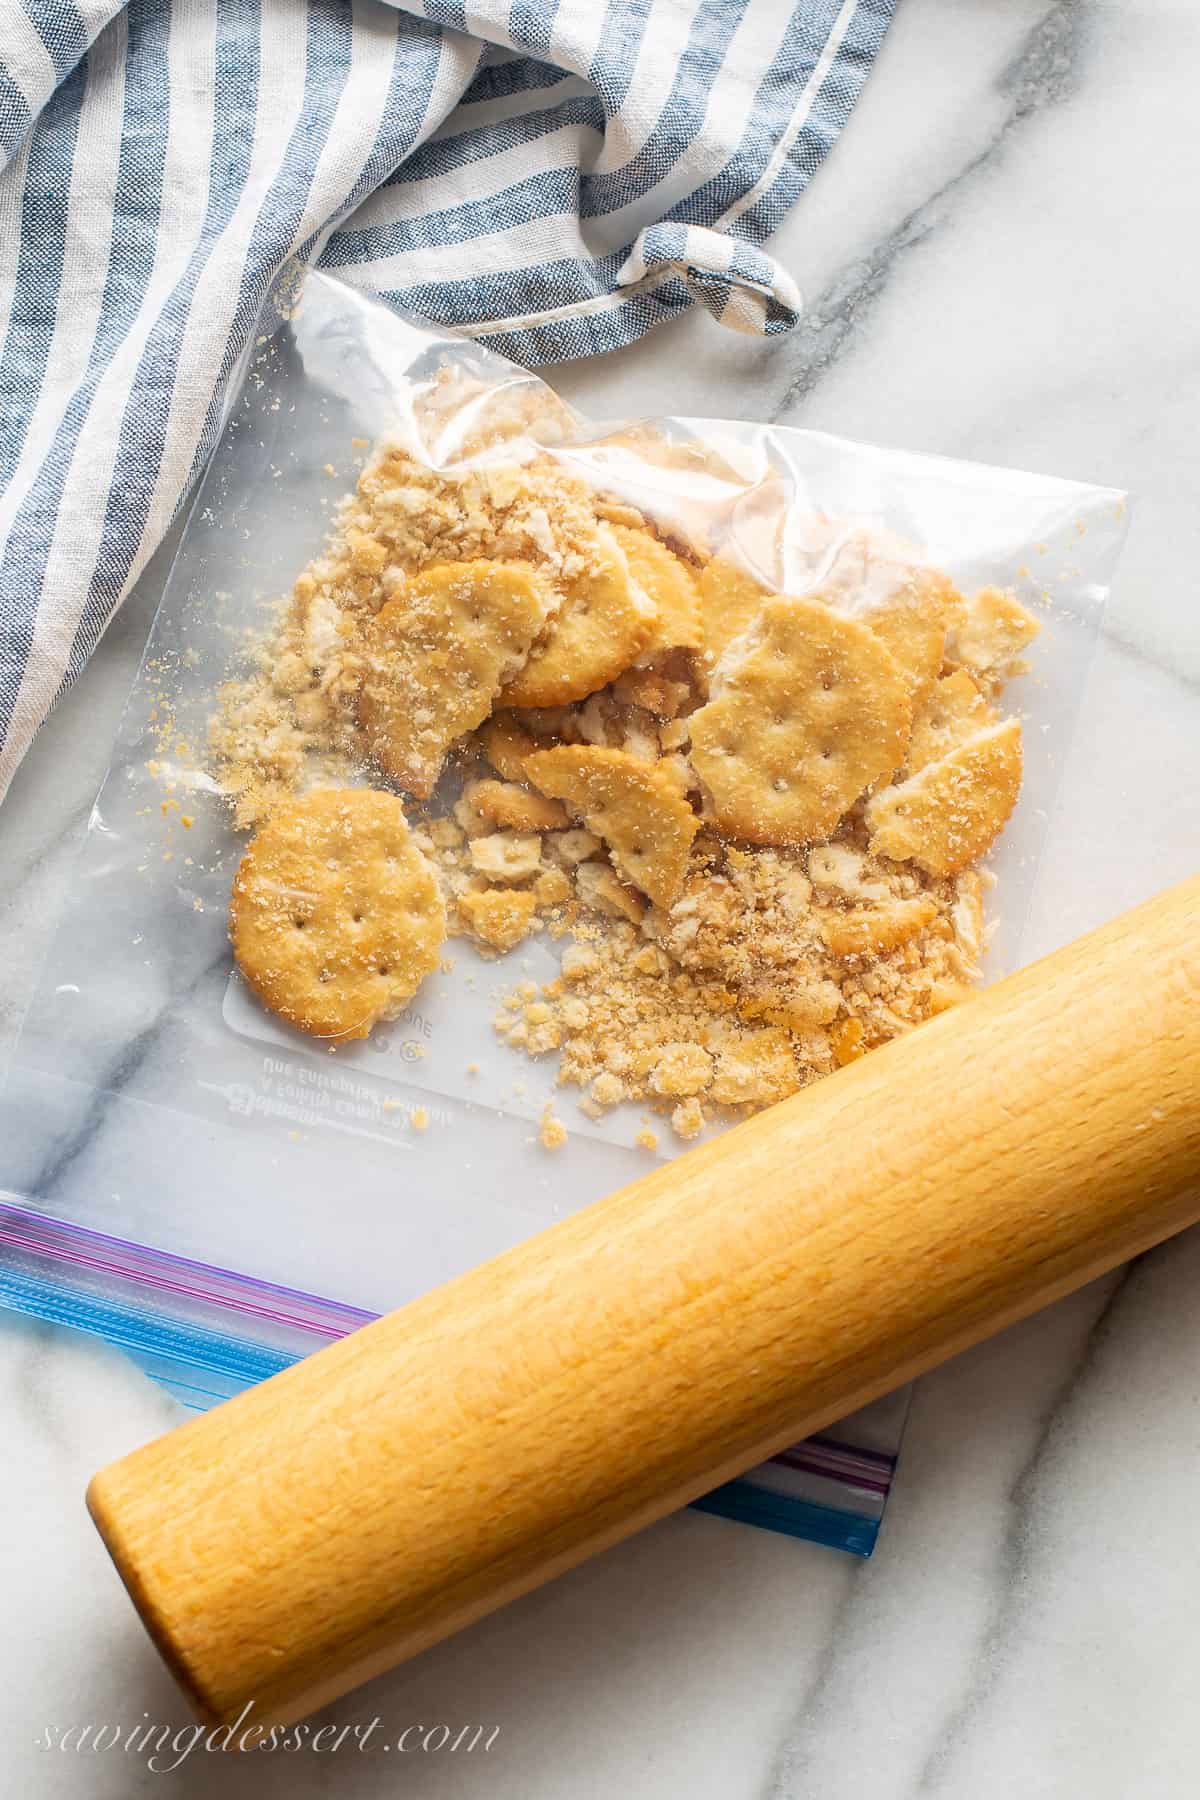 A bag of Ritz crackers being smashed with a rolling pin